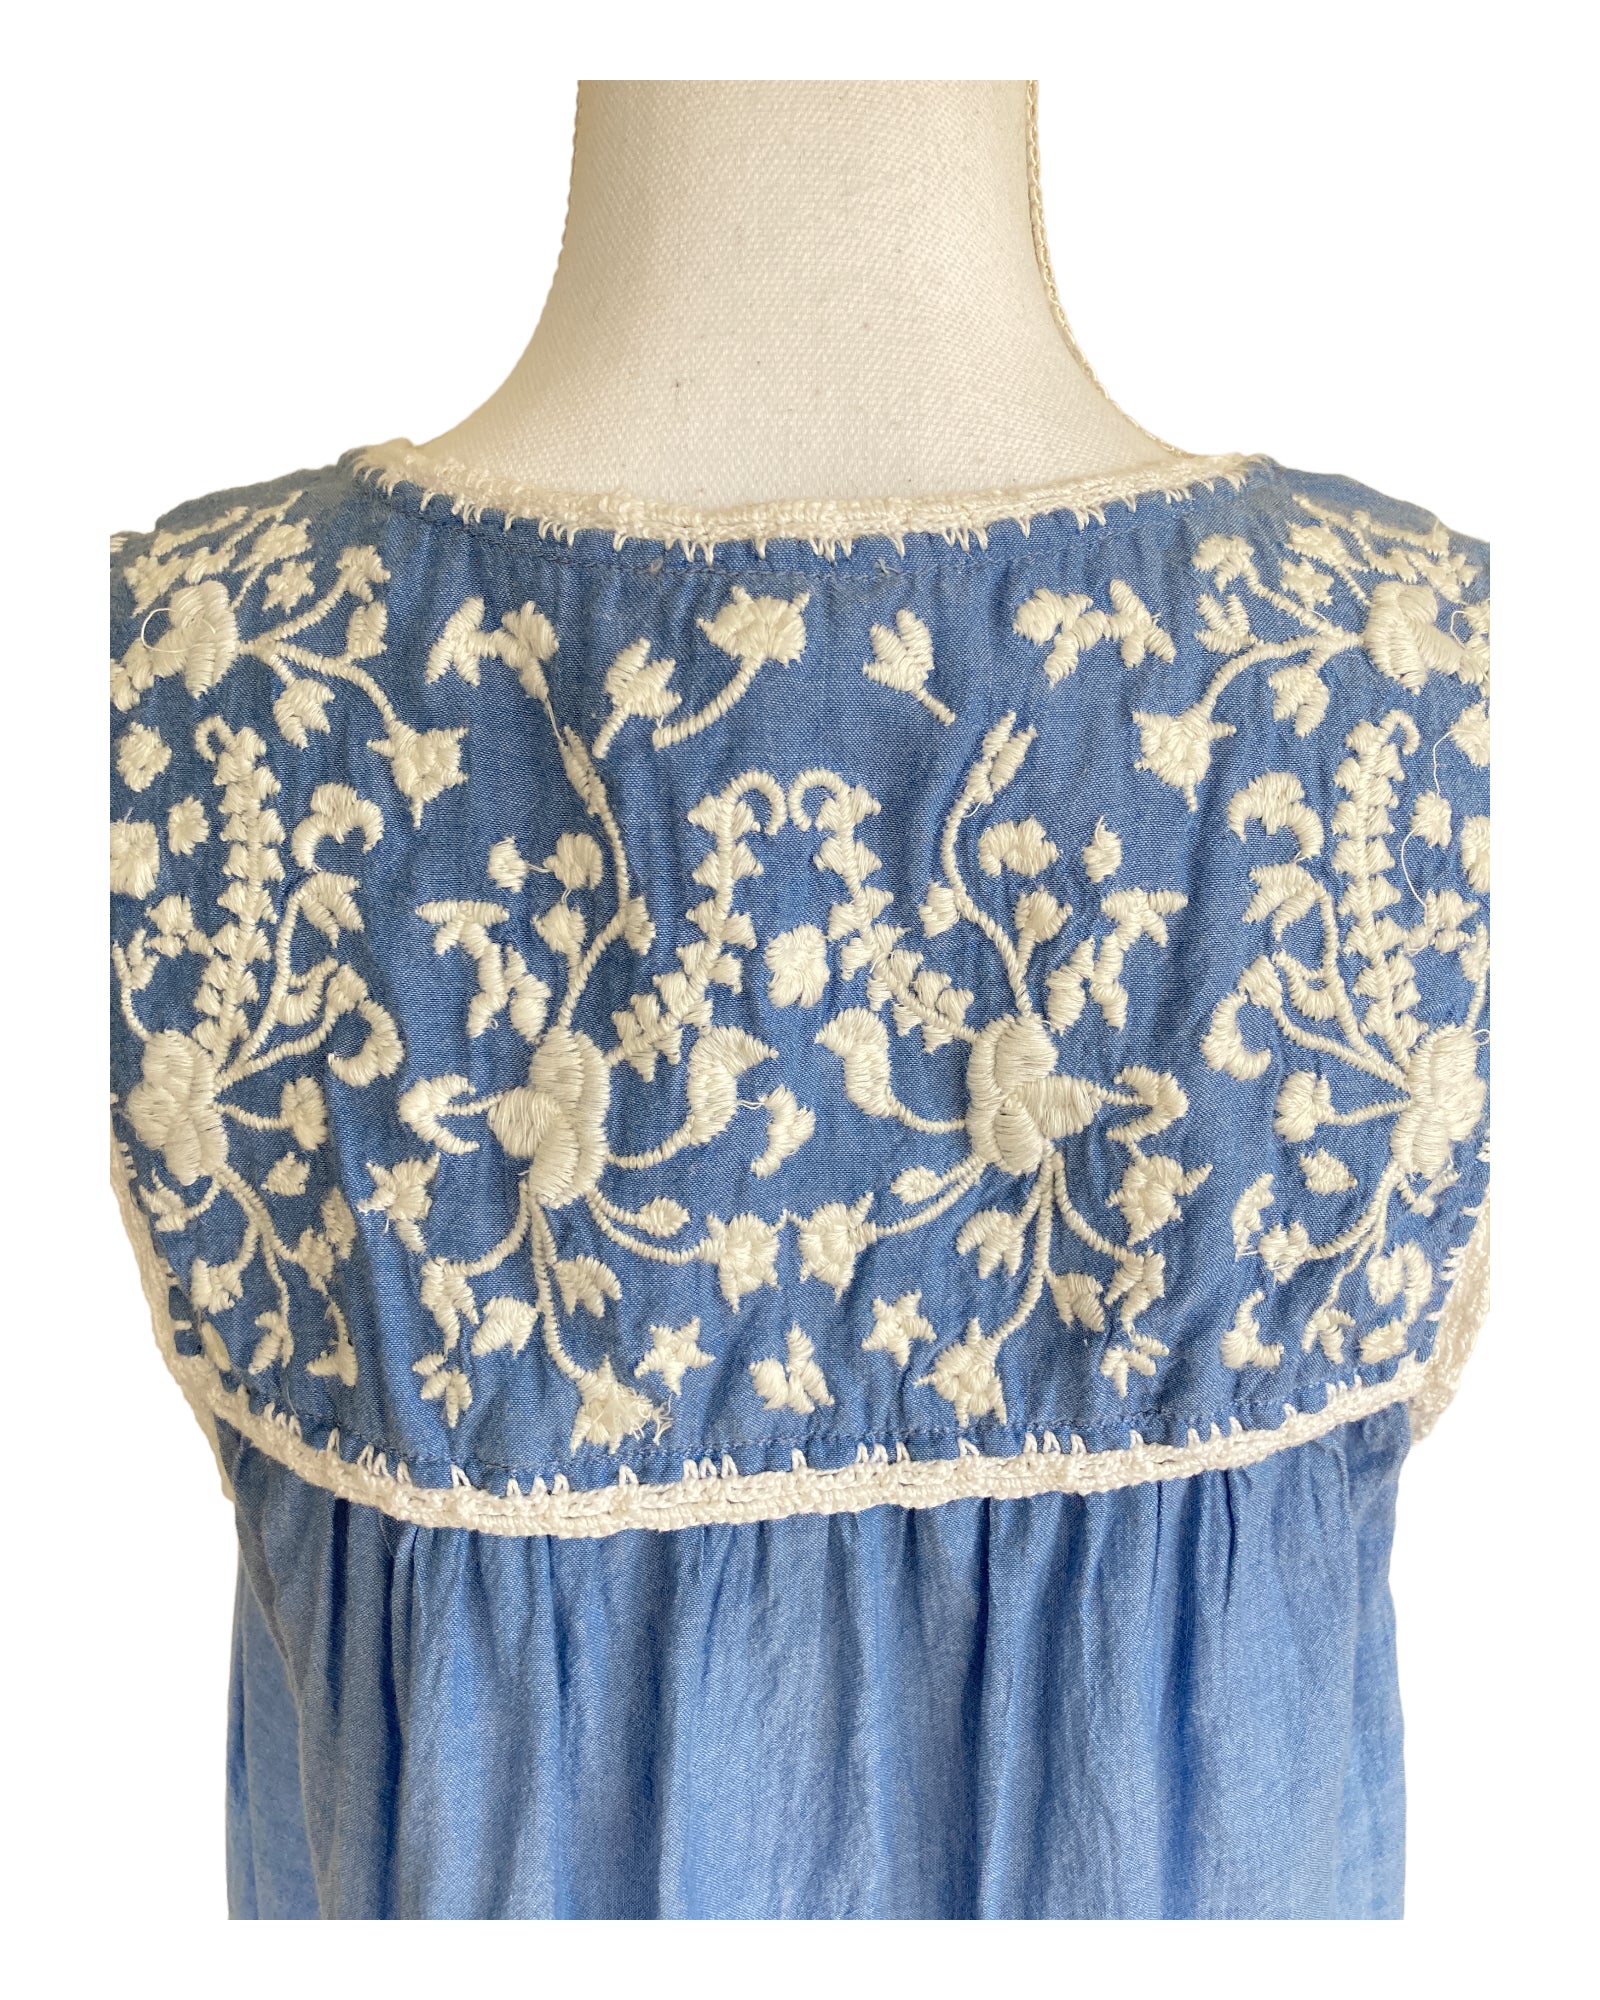 Joie Chambray Embroidered Sleeveless Tunic, M